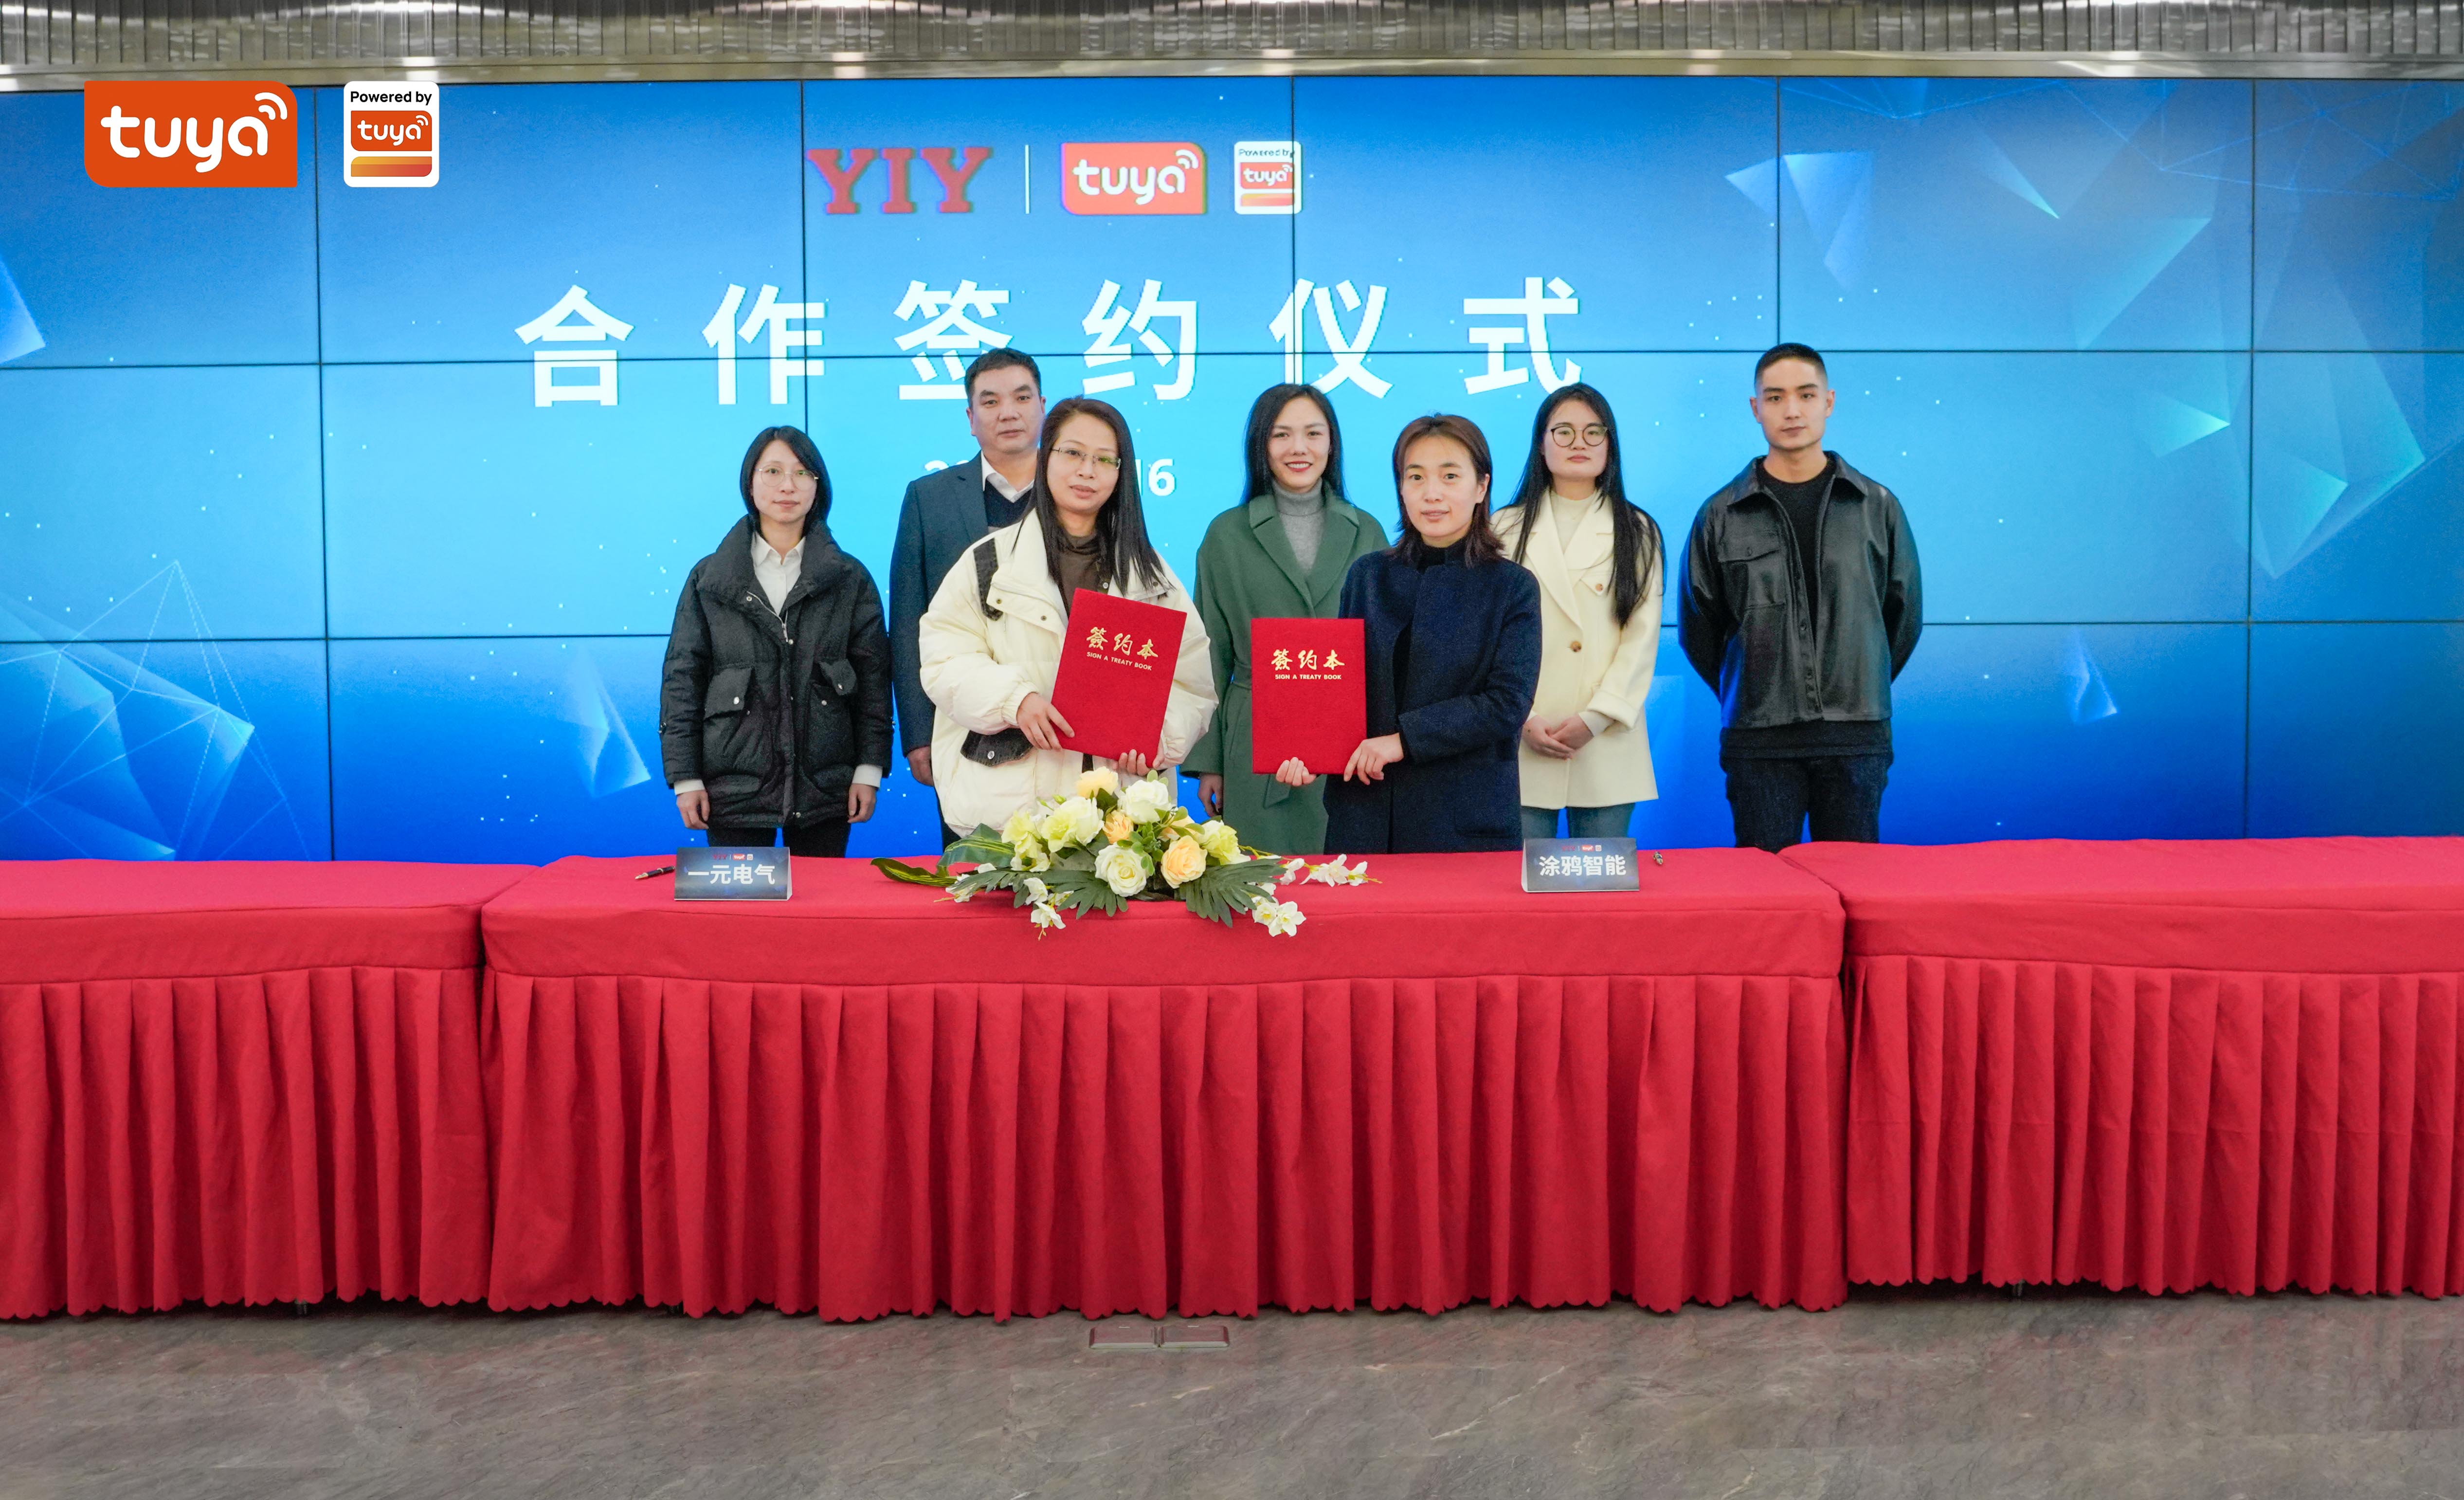 Yiyen Announced a Partnership with Tuya to Build a Sustainable Future with Smart Energy Management Solutions